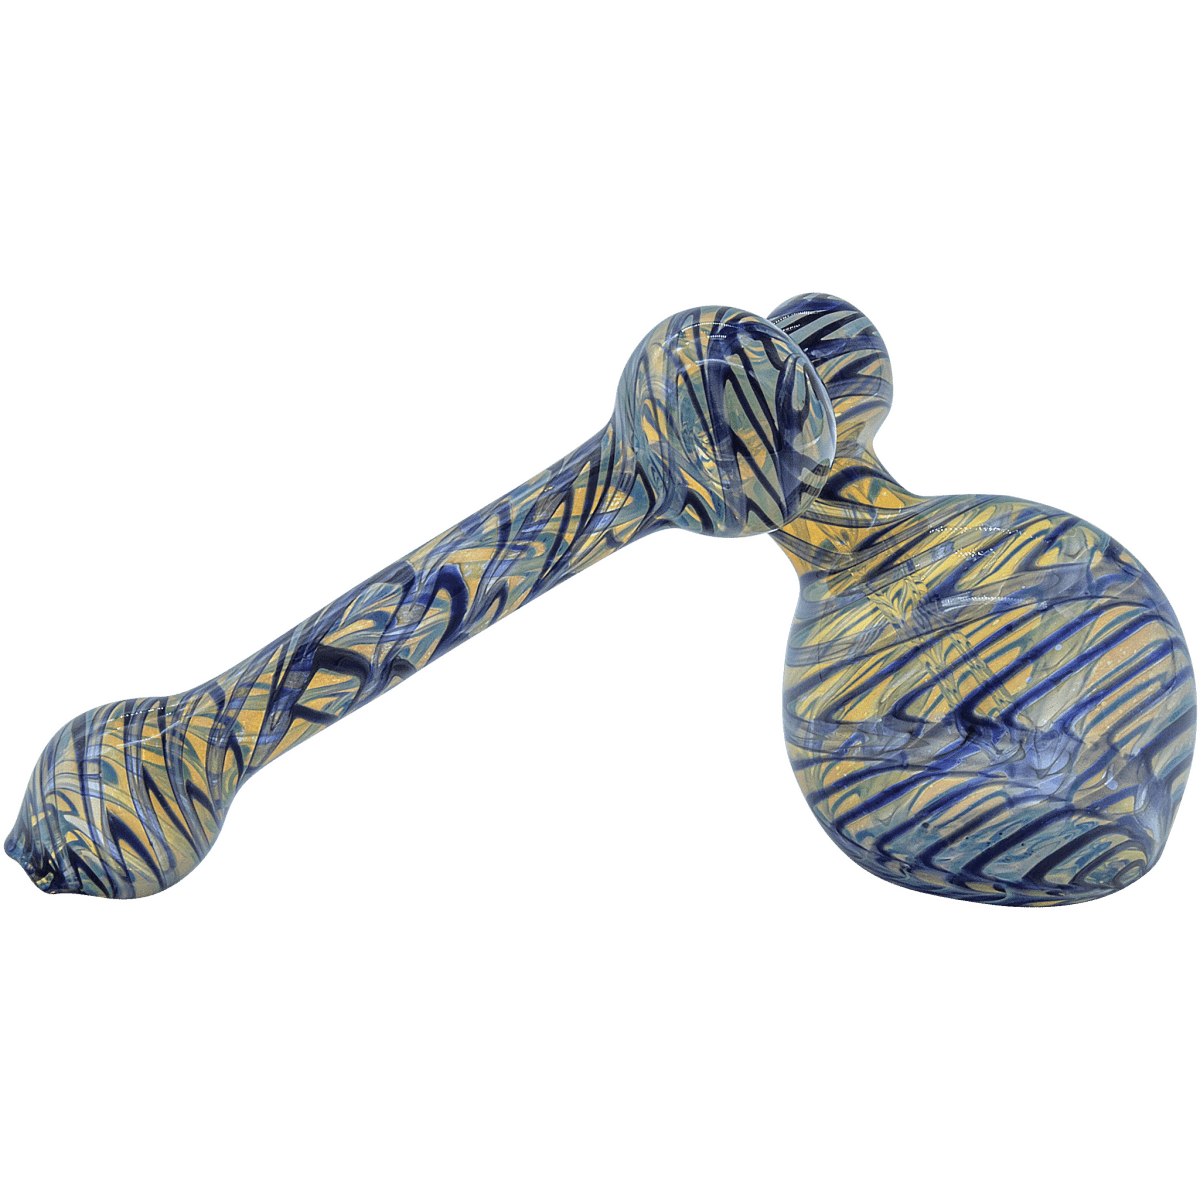 LA Pipes Bubbler "Colored Sidecar" Fumed Sidecar Bubbler Pipe (Various Colors)